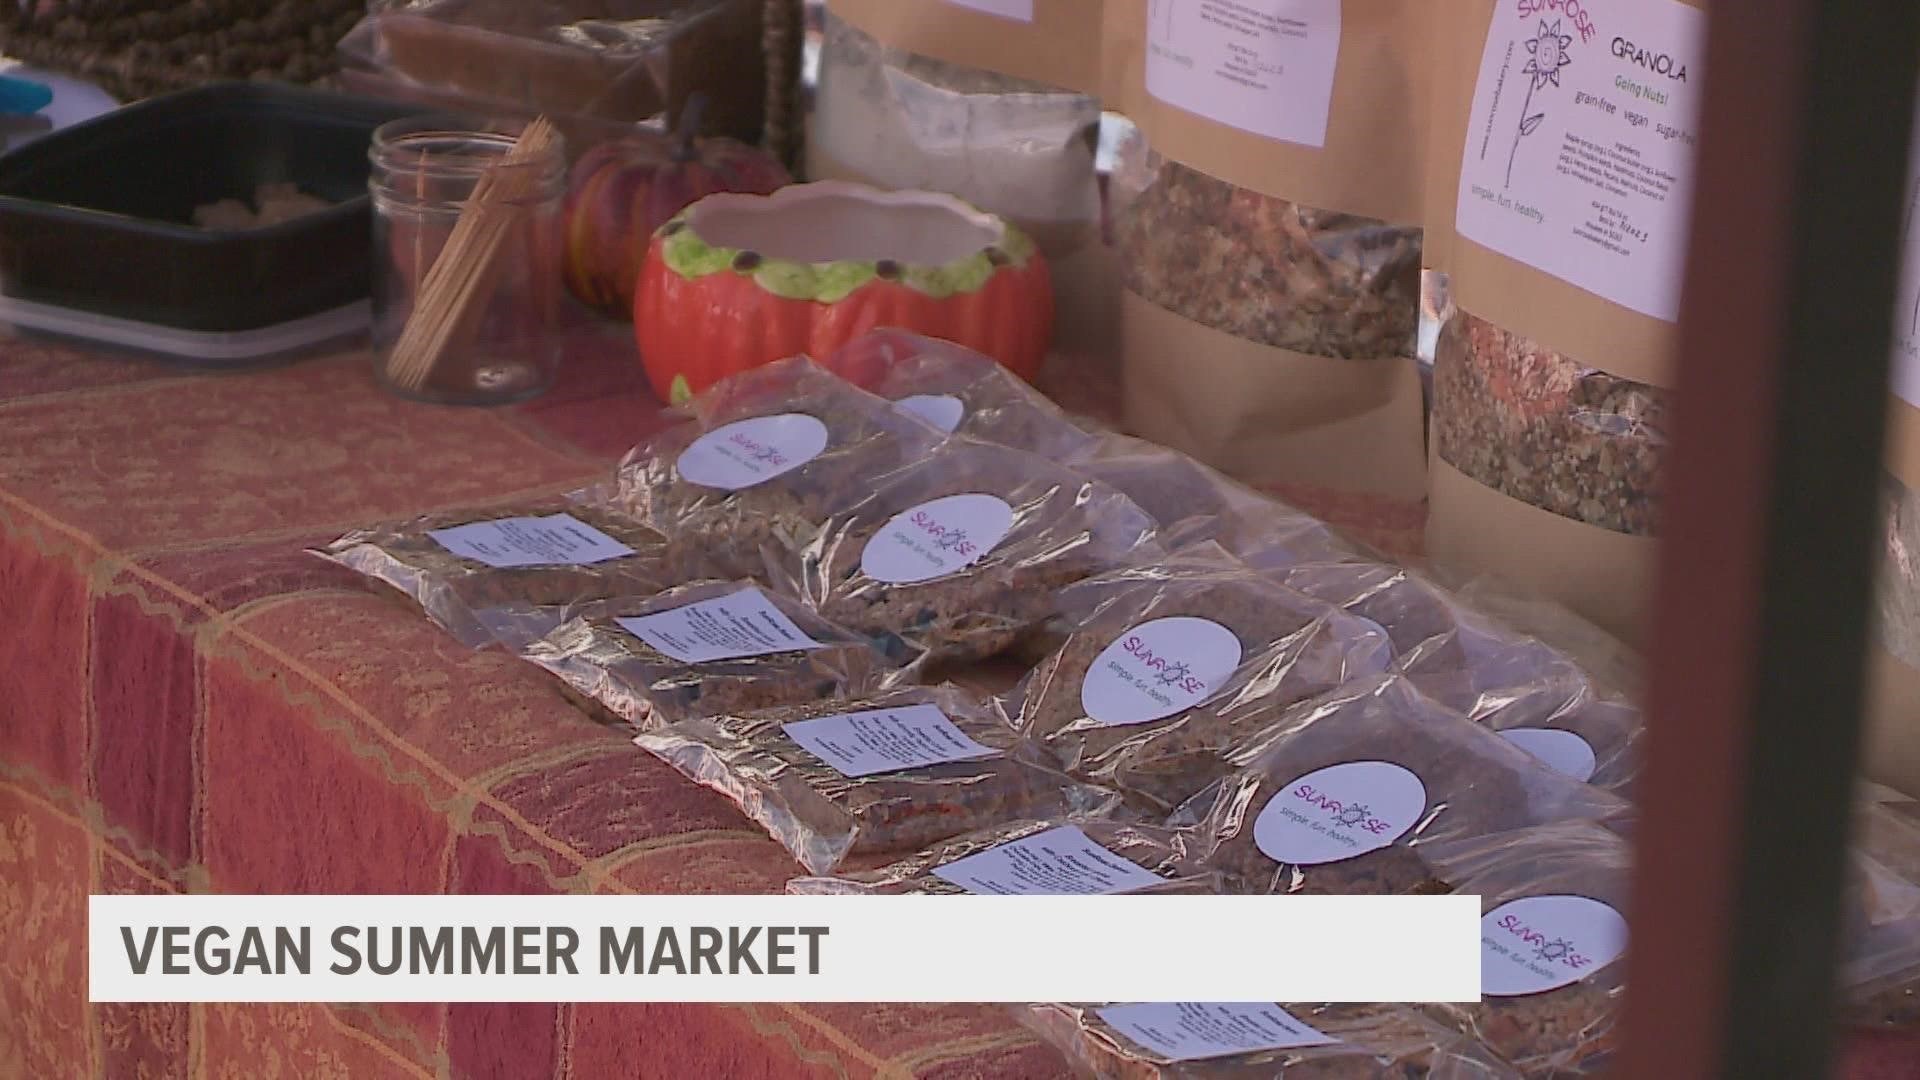 The event featured local farmers, makers and shop owners and was led entirely by volunteers.